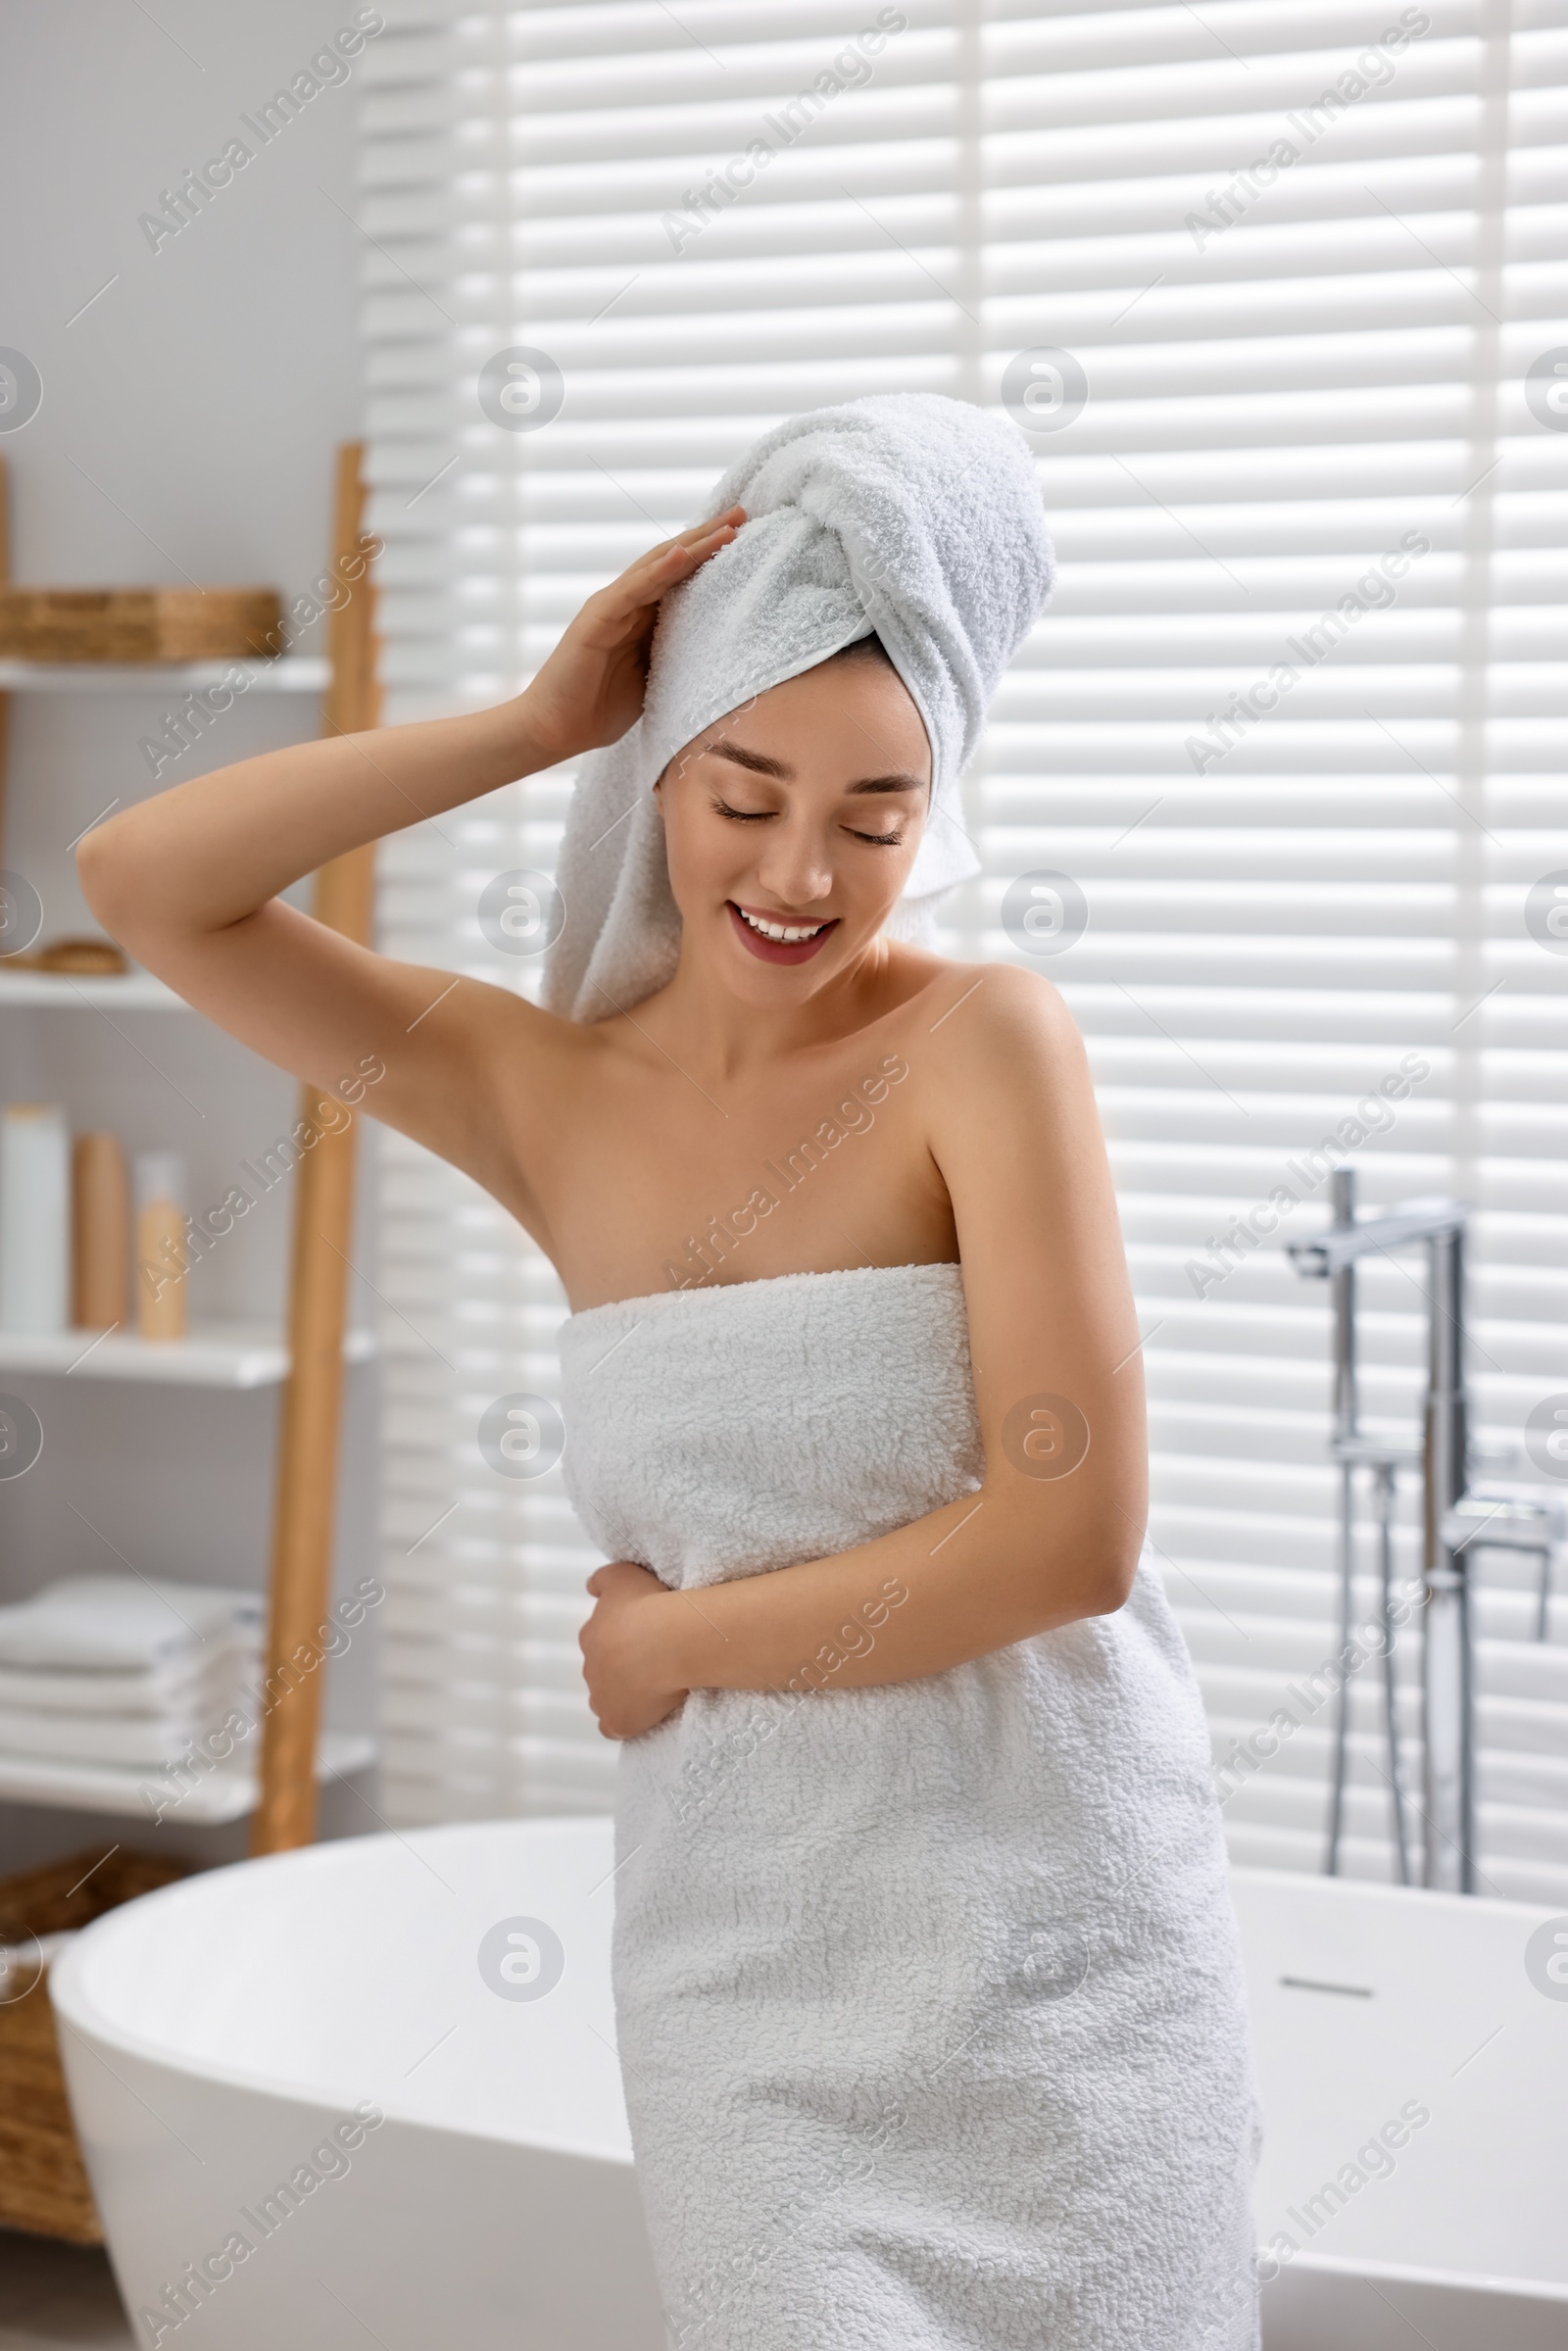 Photo of Smiling young woman near tub after shower in bathroom